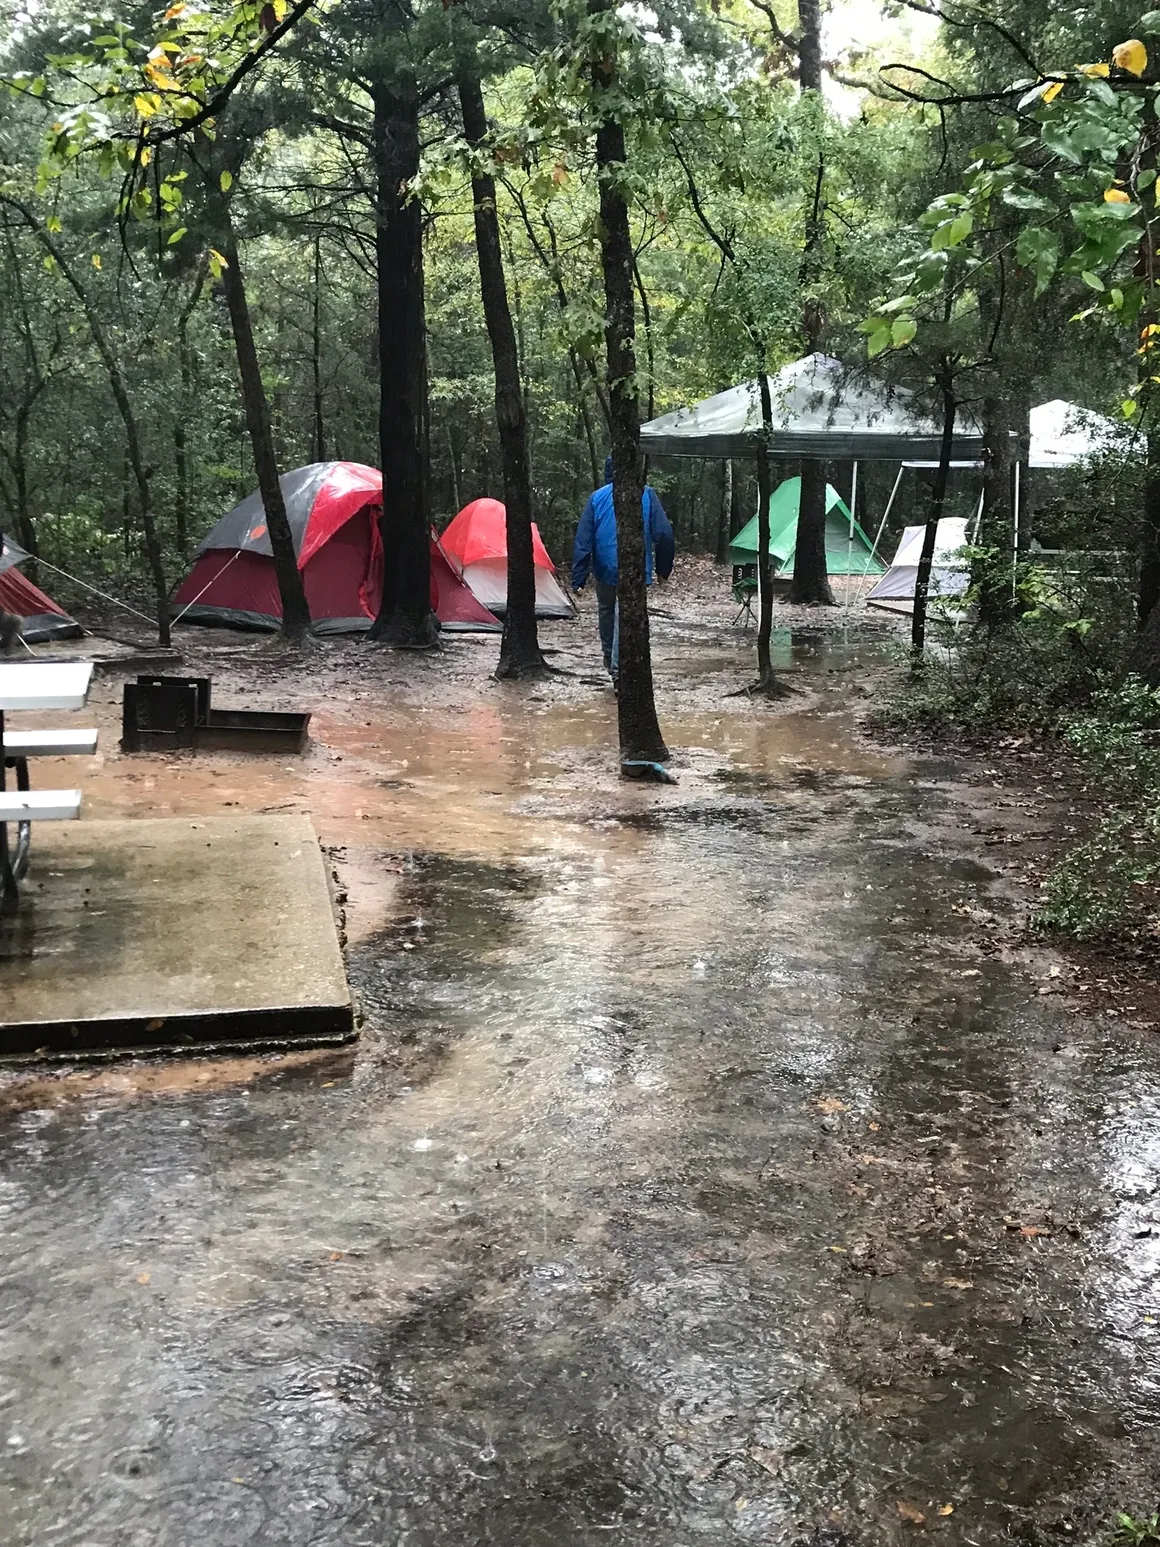 A group of tents in the woods with tables and chairs.